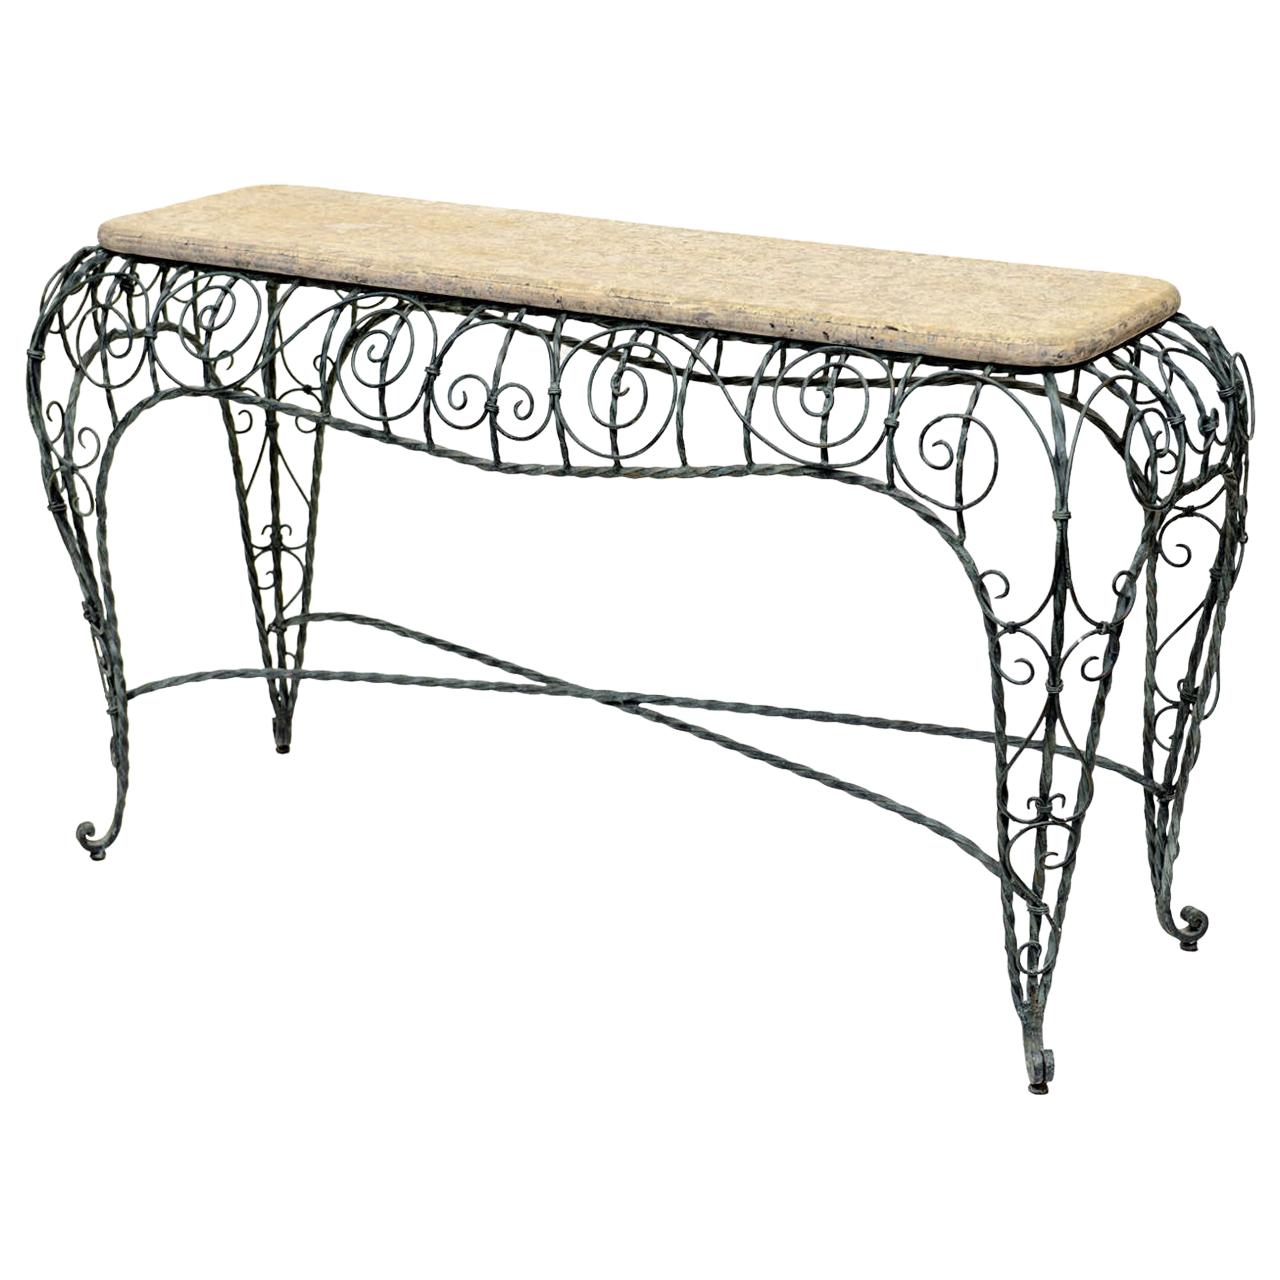 Exceptional and Intricate Forged Iron Console with Faux Stone Top